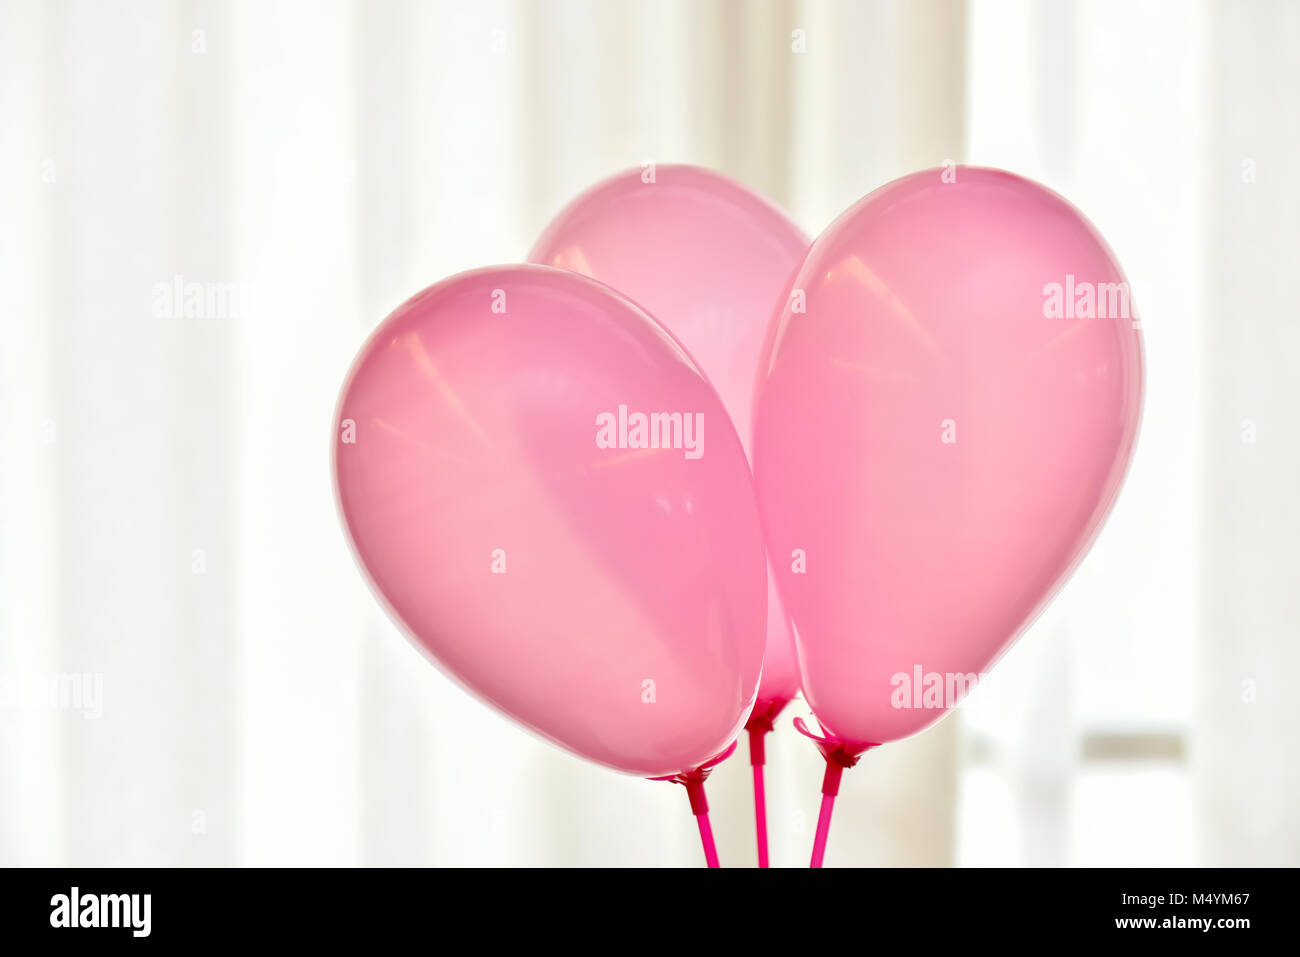 Flowers for party, celebration details, Italy Stock Photo